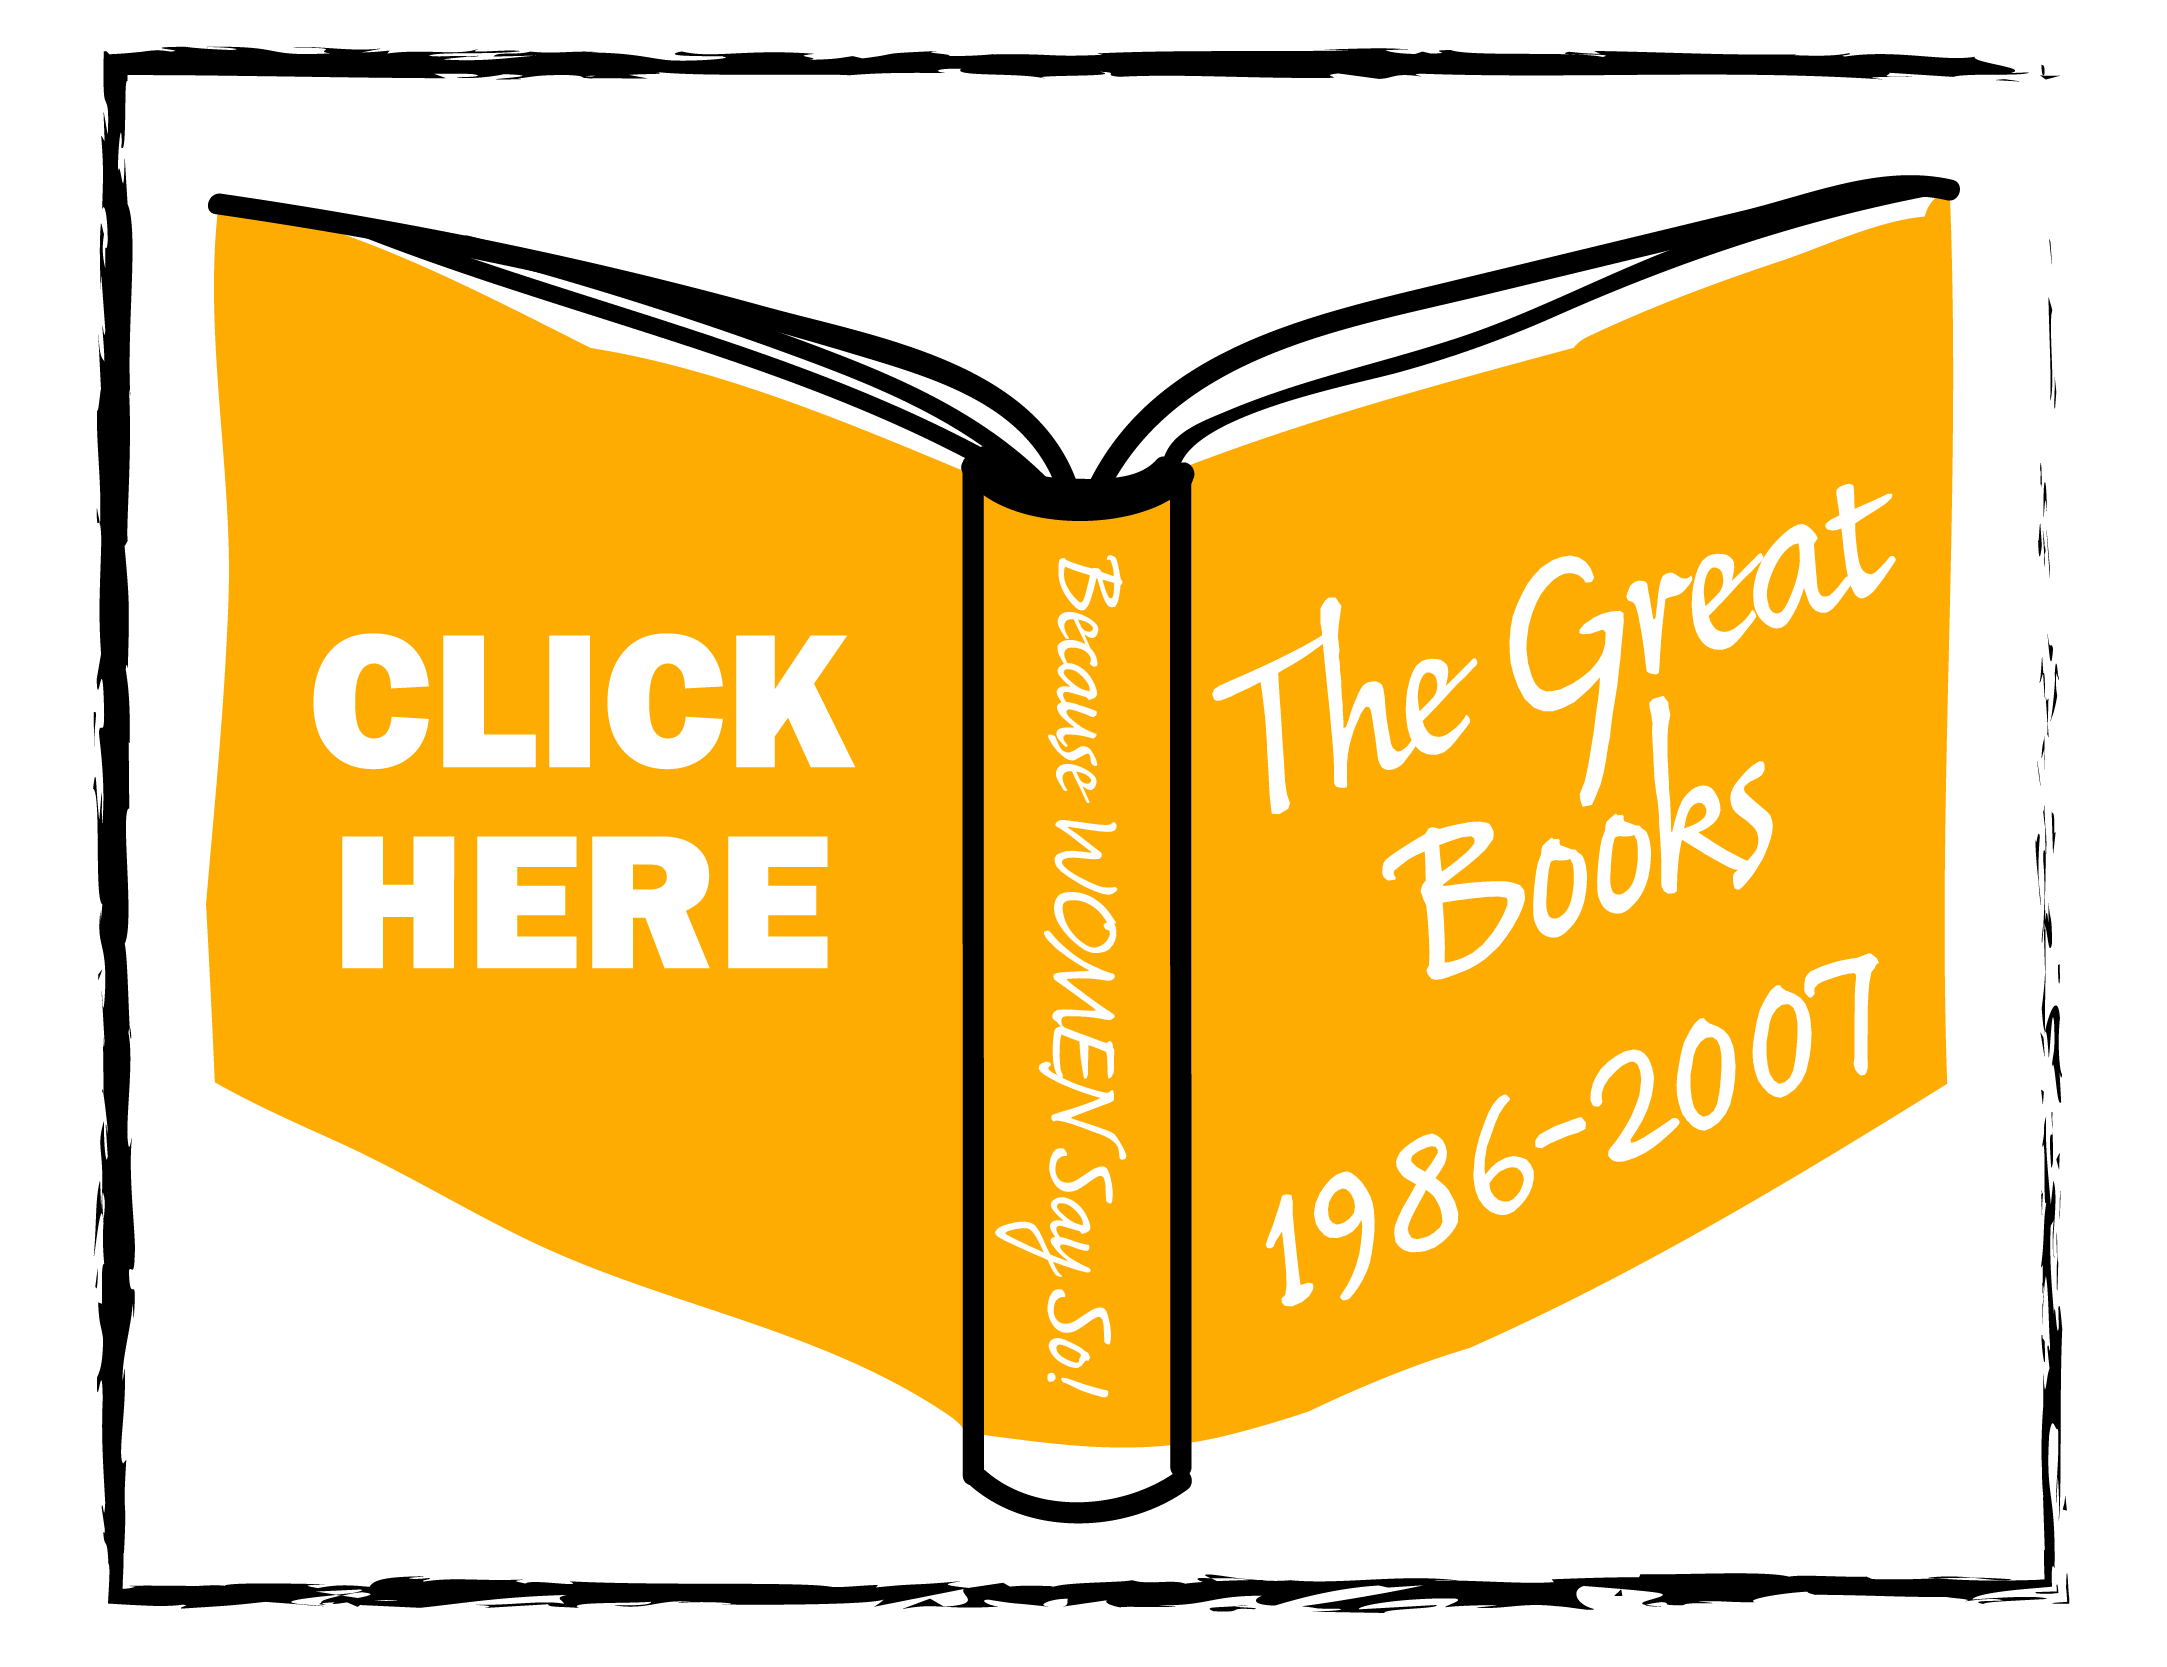 The Great Books 1986-2007